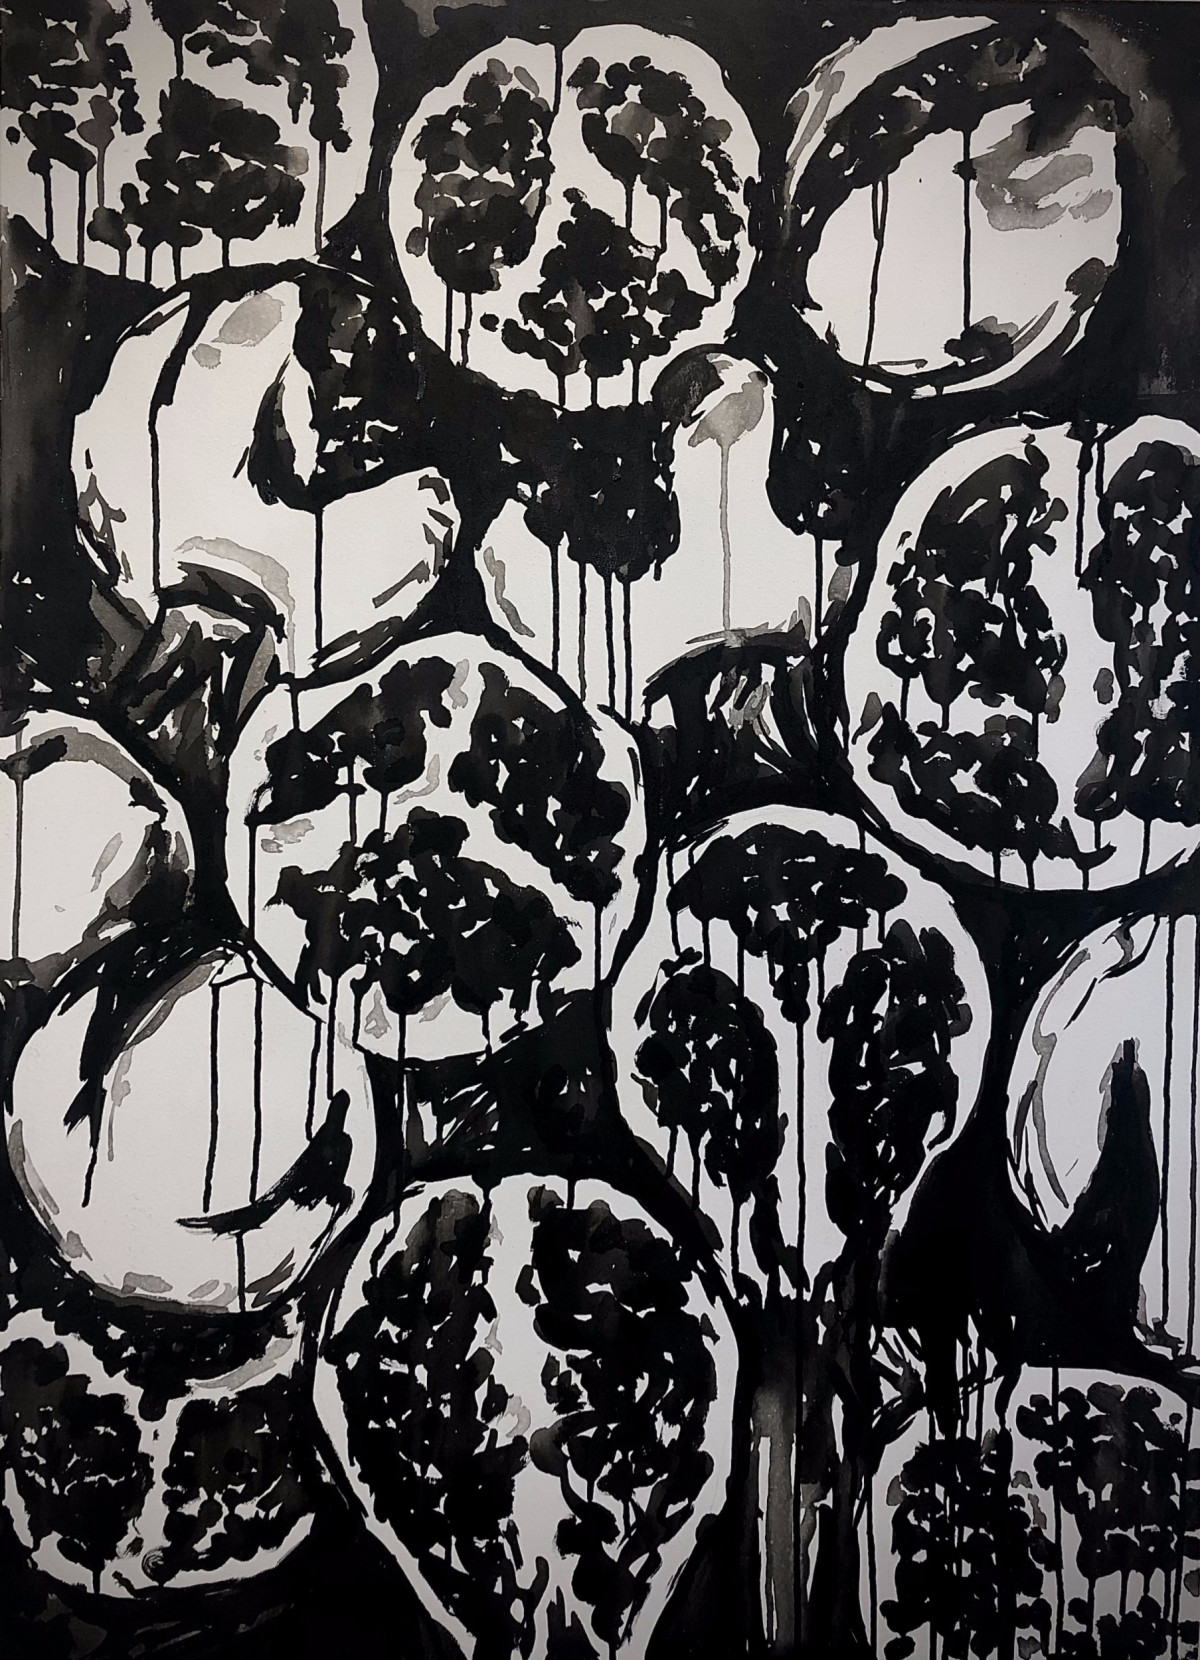 'A Rot In The System', Ink on canvas, 80 x 110cm